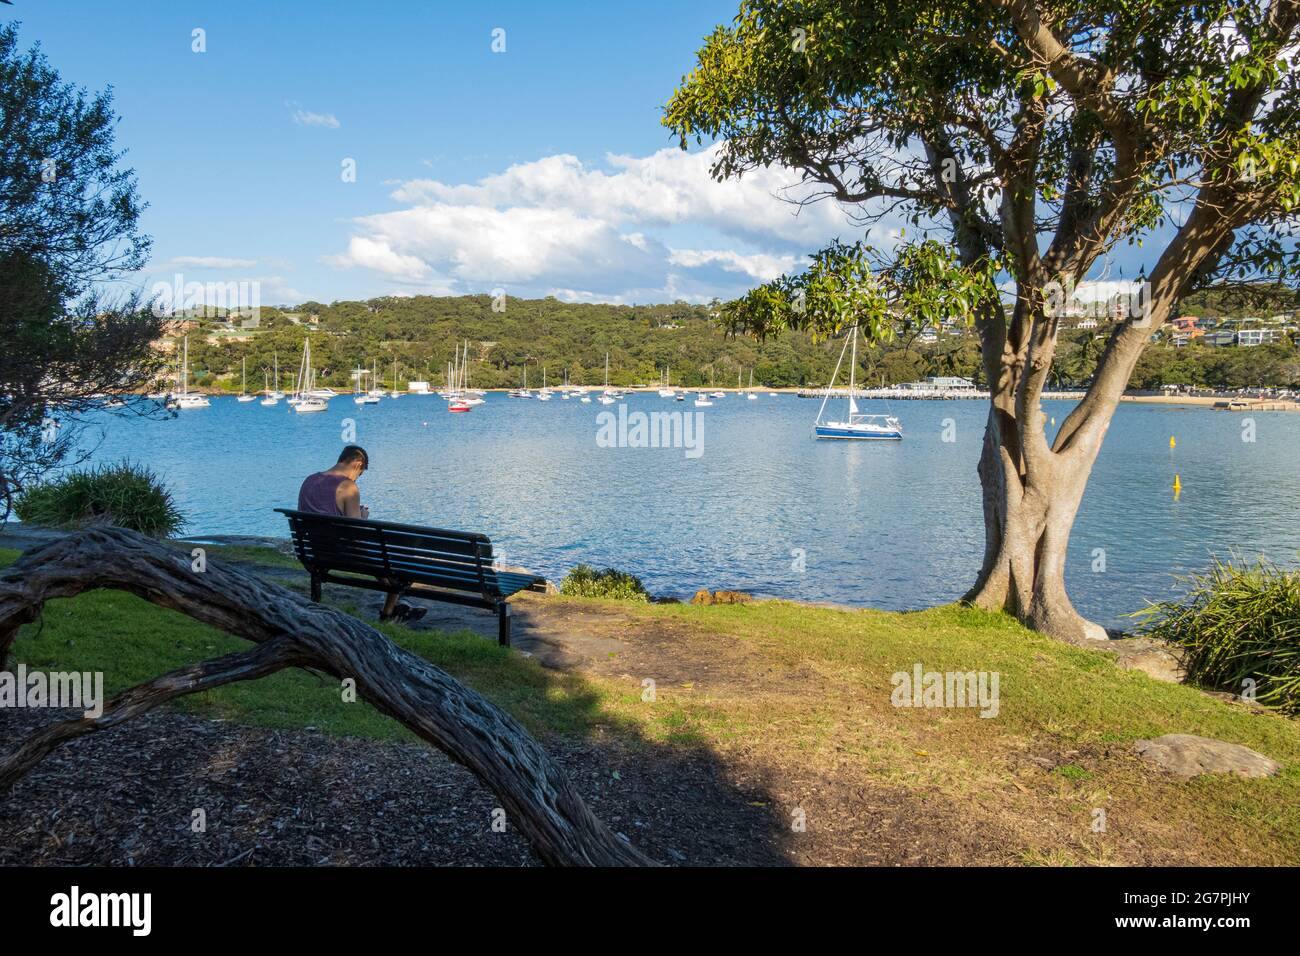 Man sitting and relaxing on a sunny day at Balmoral Beach, Sydney, Australia, during the pandemic lockdown Stock Photo